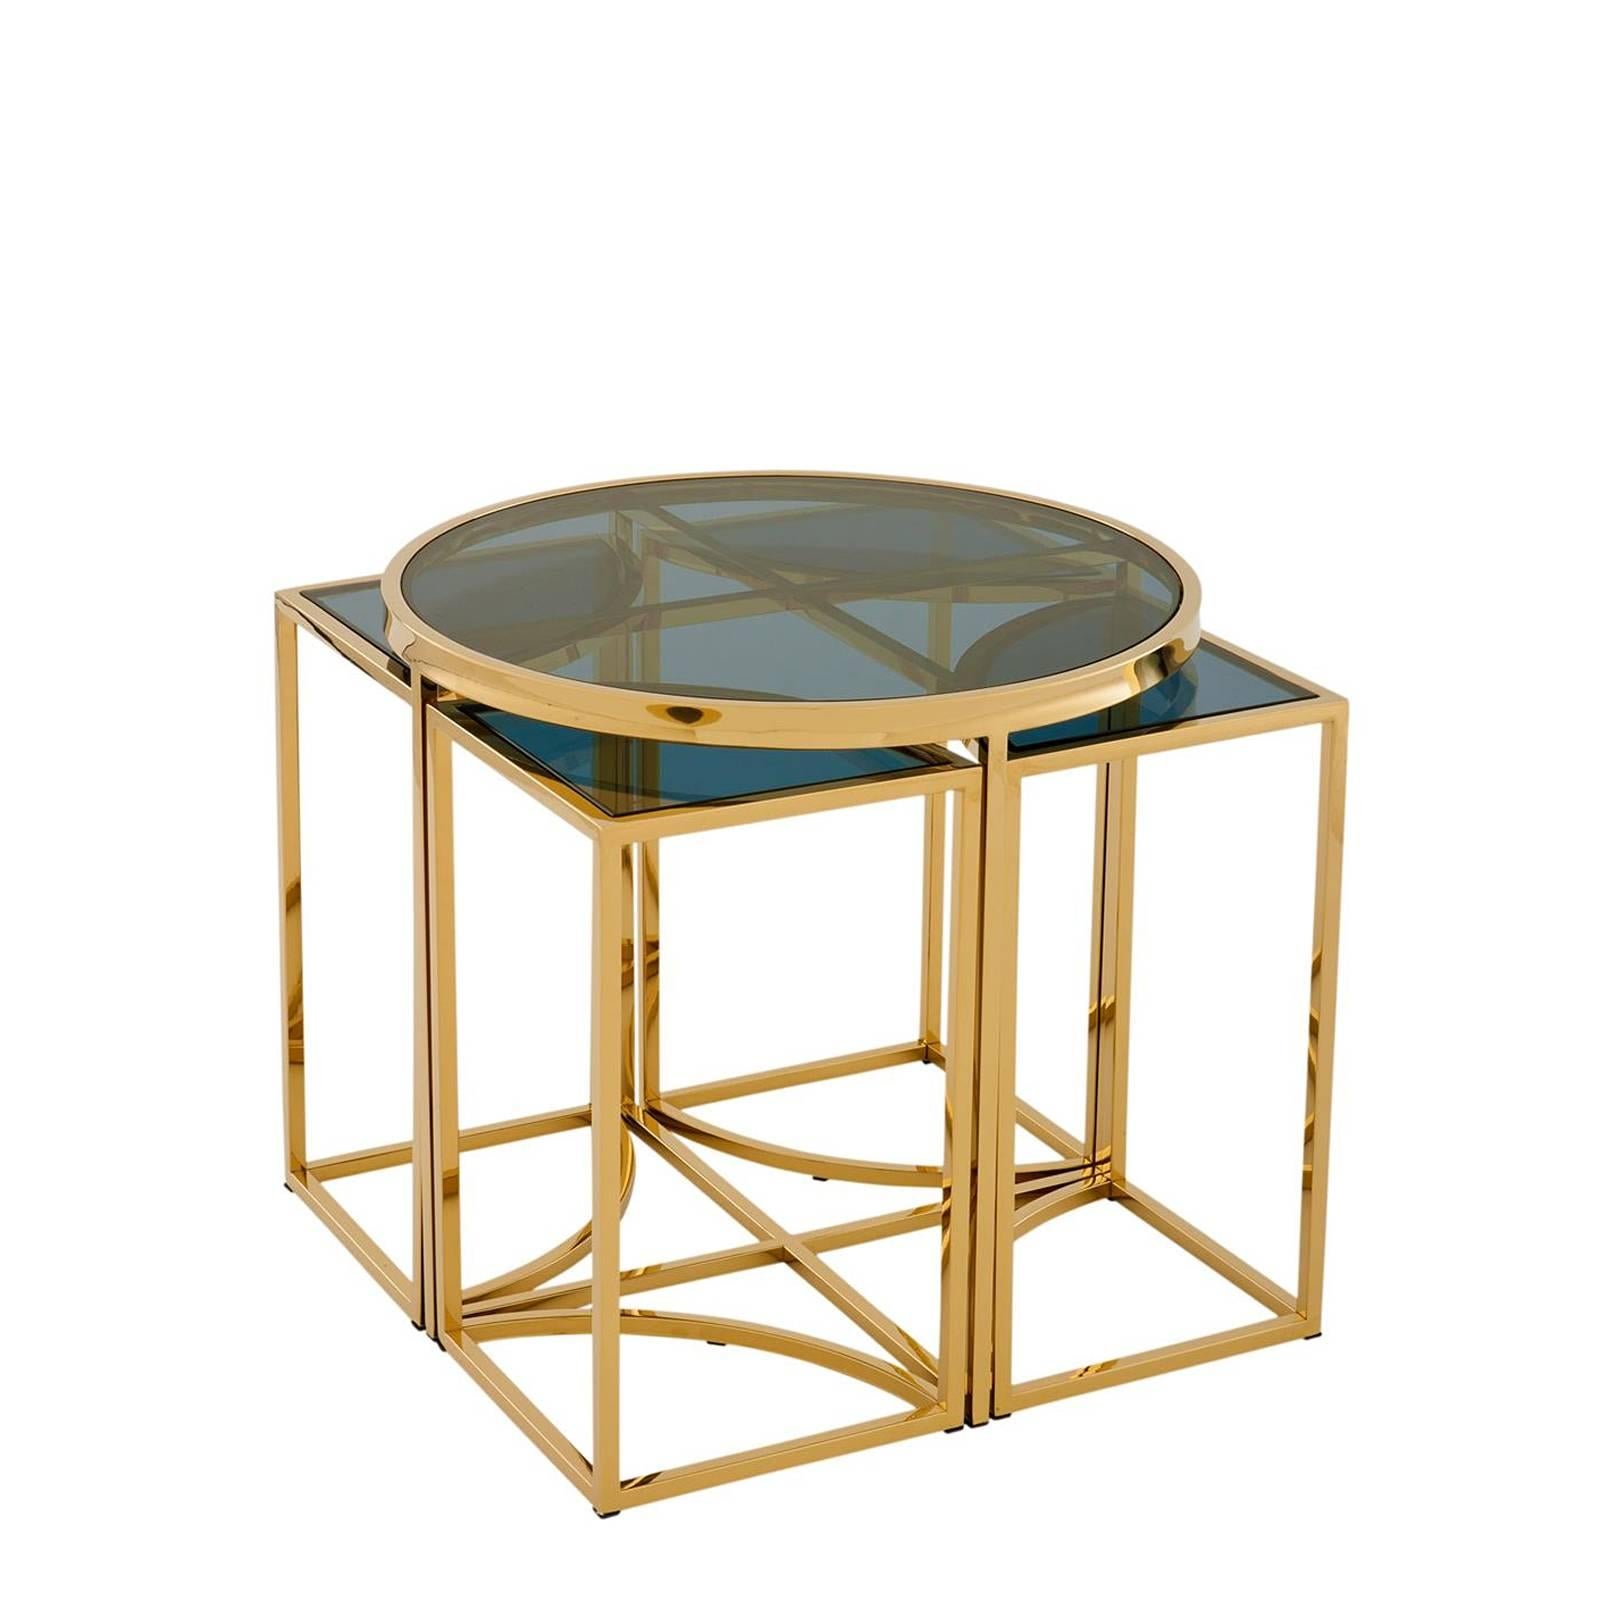 Chinese Four Pieces Side Table in Gold Finish or Polished Stainless Steel